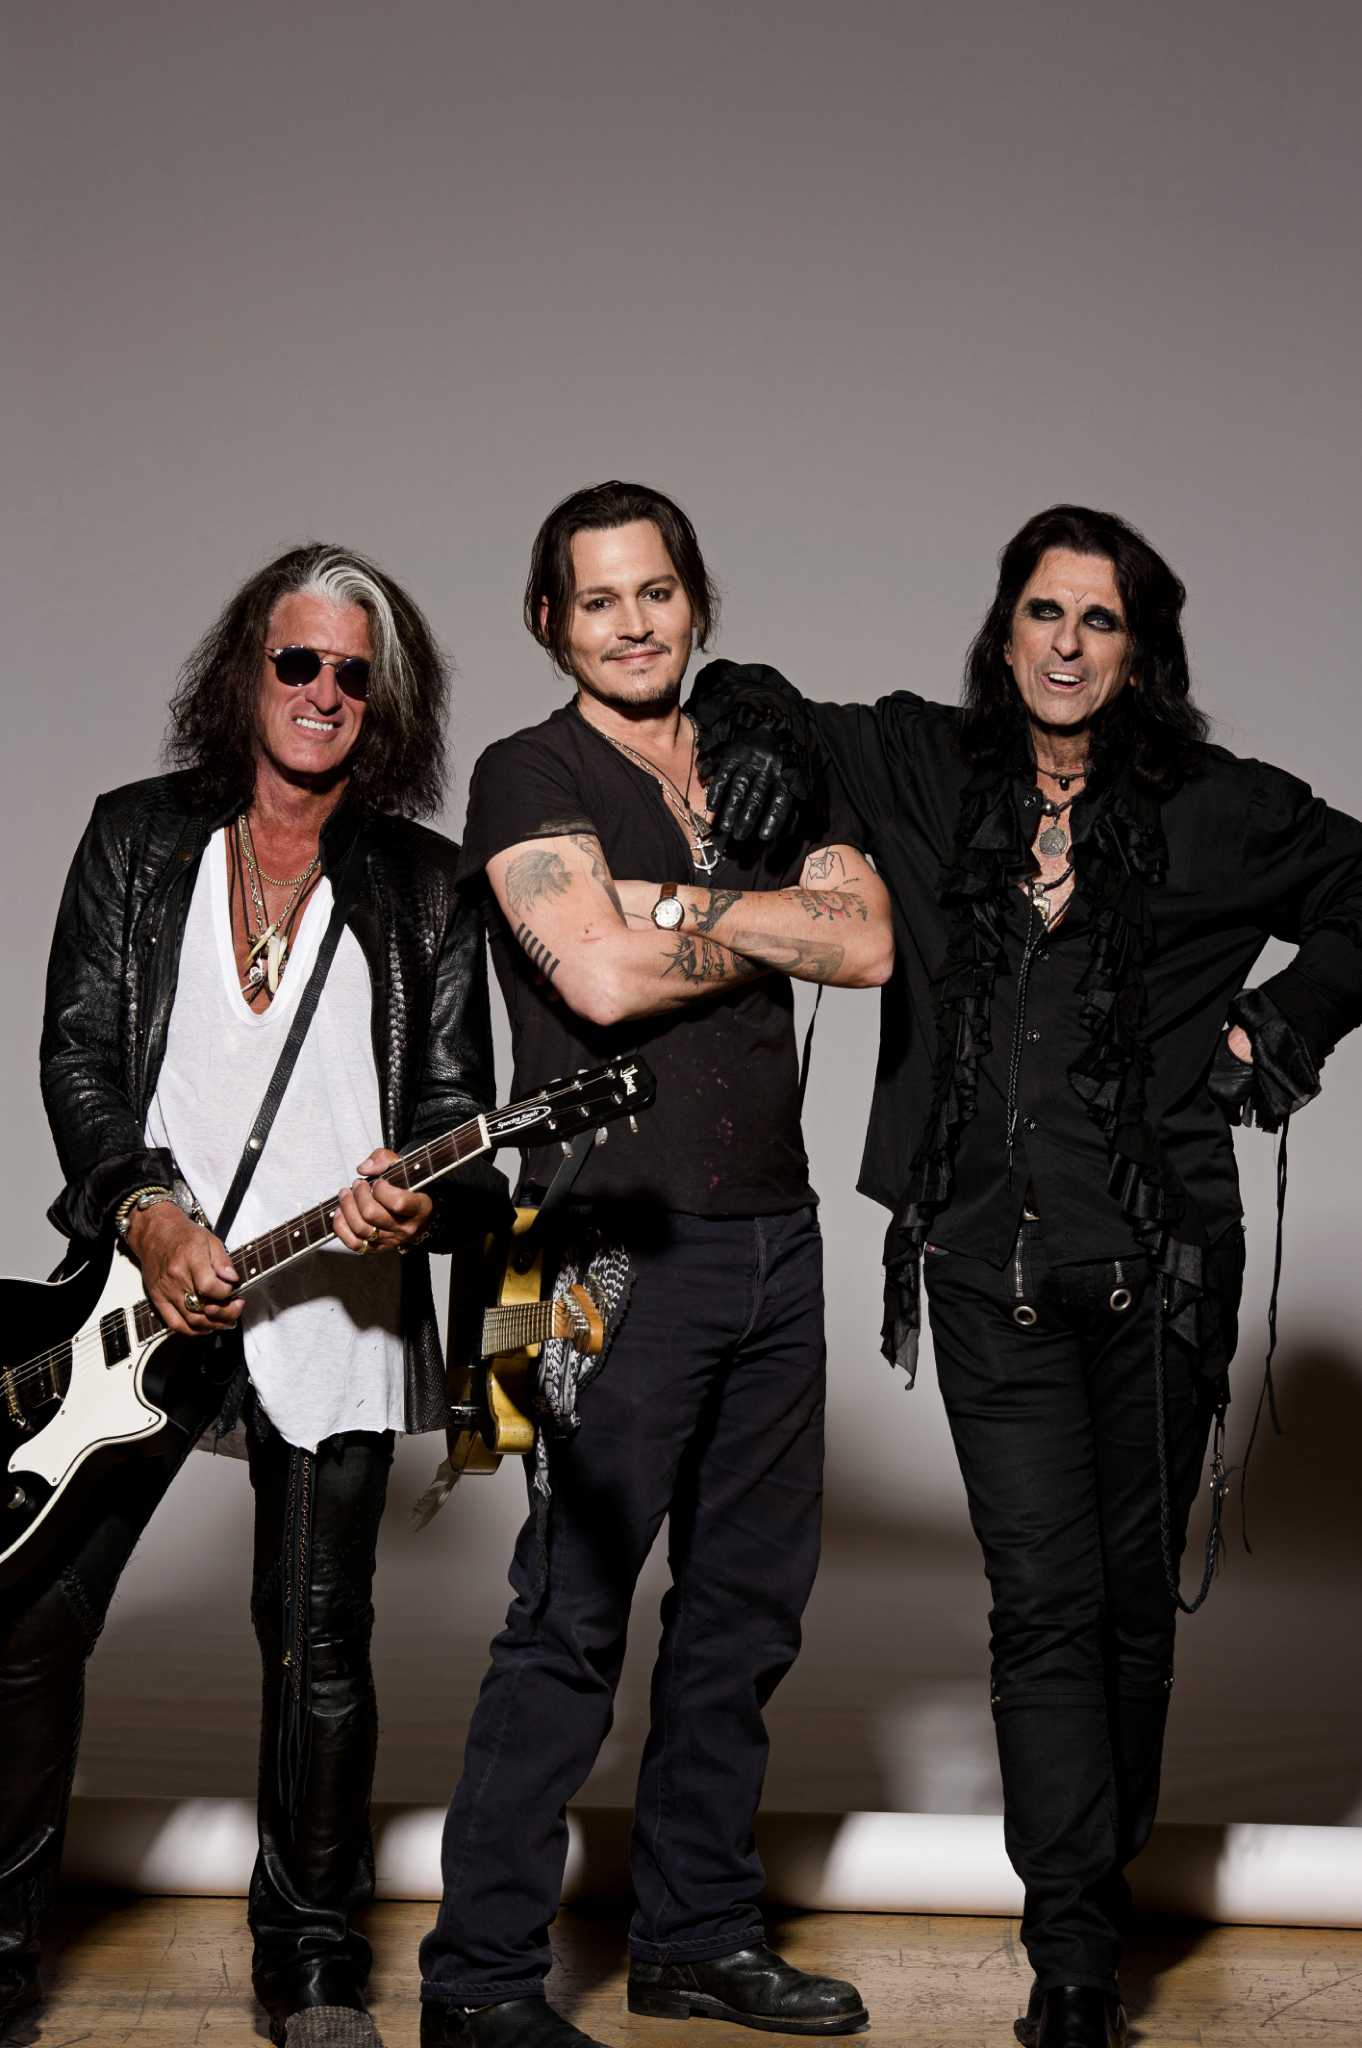 Hollywood Vampires set to rock Foxwoods on Saturday, July 2